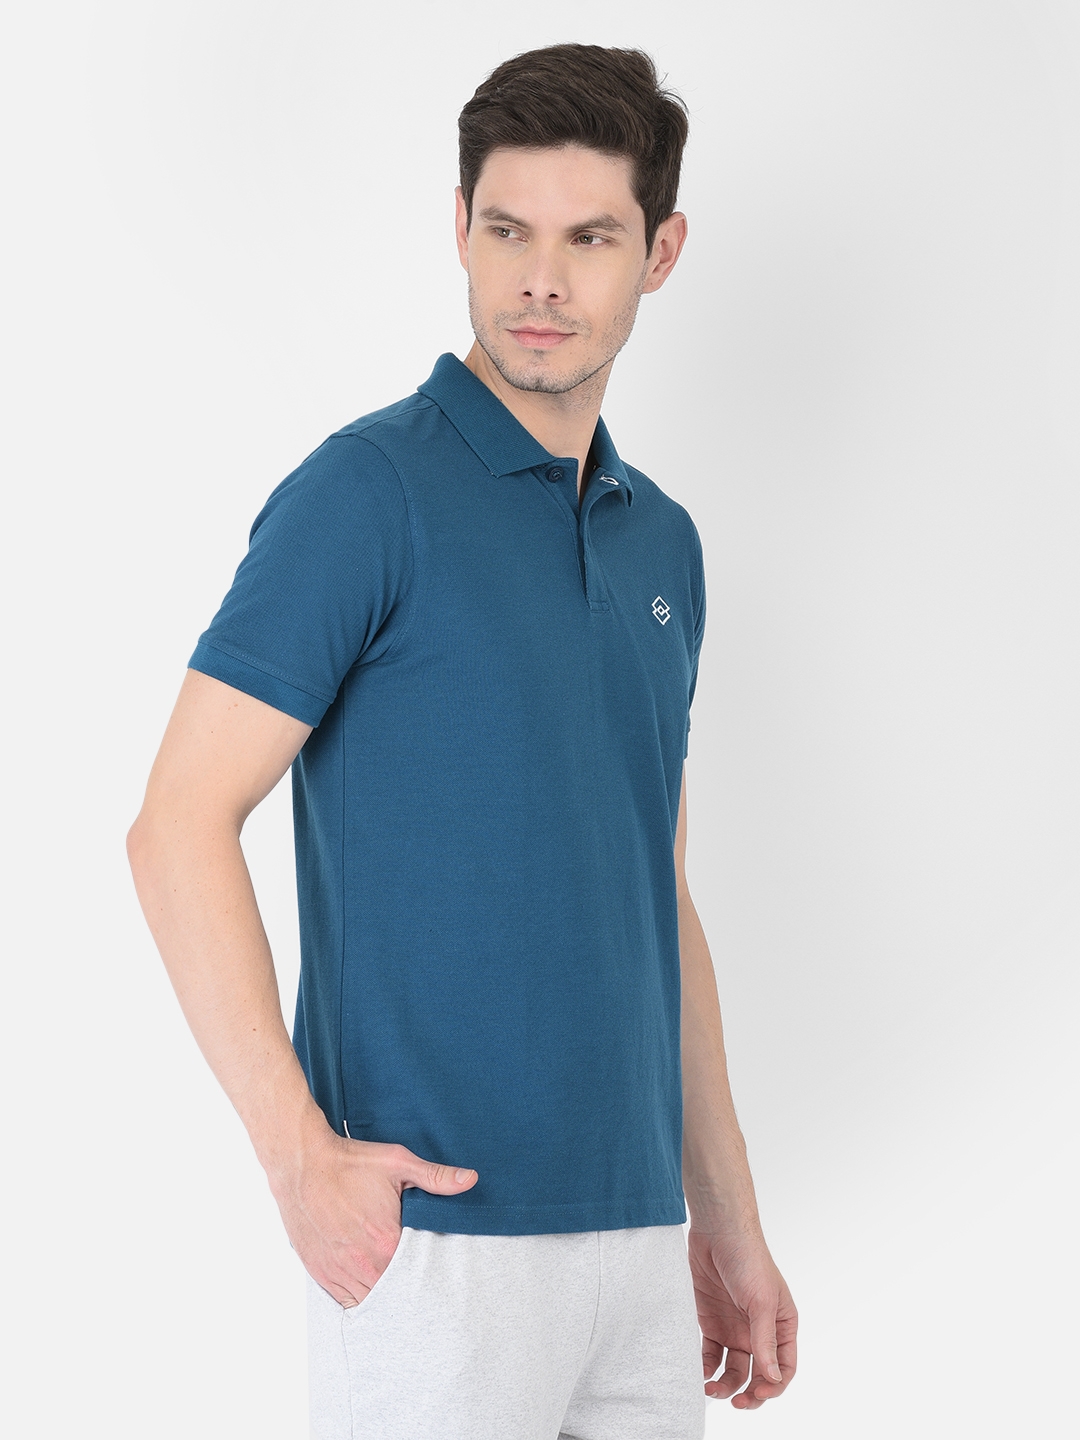 Lotto | LOTTO MEN ST FIRENZE TEAL POLO